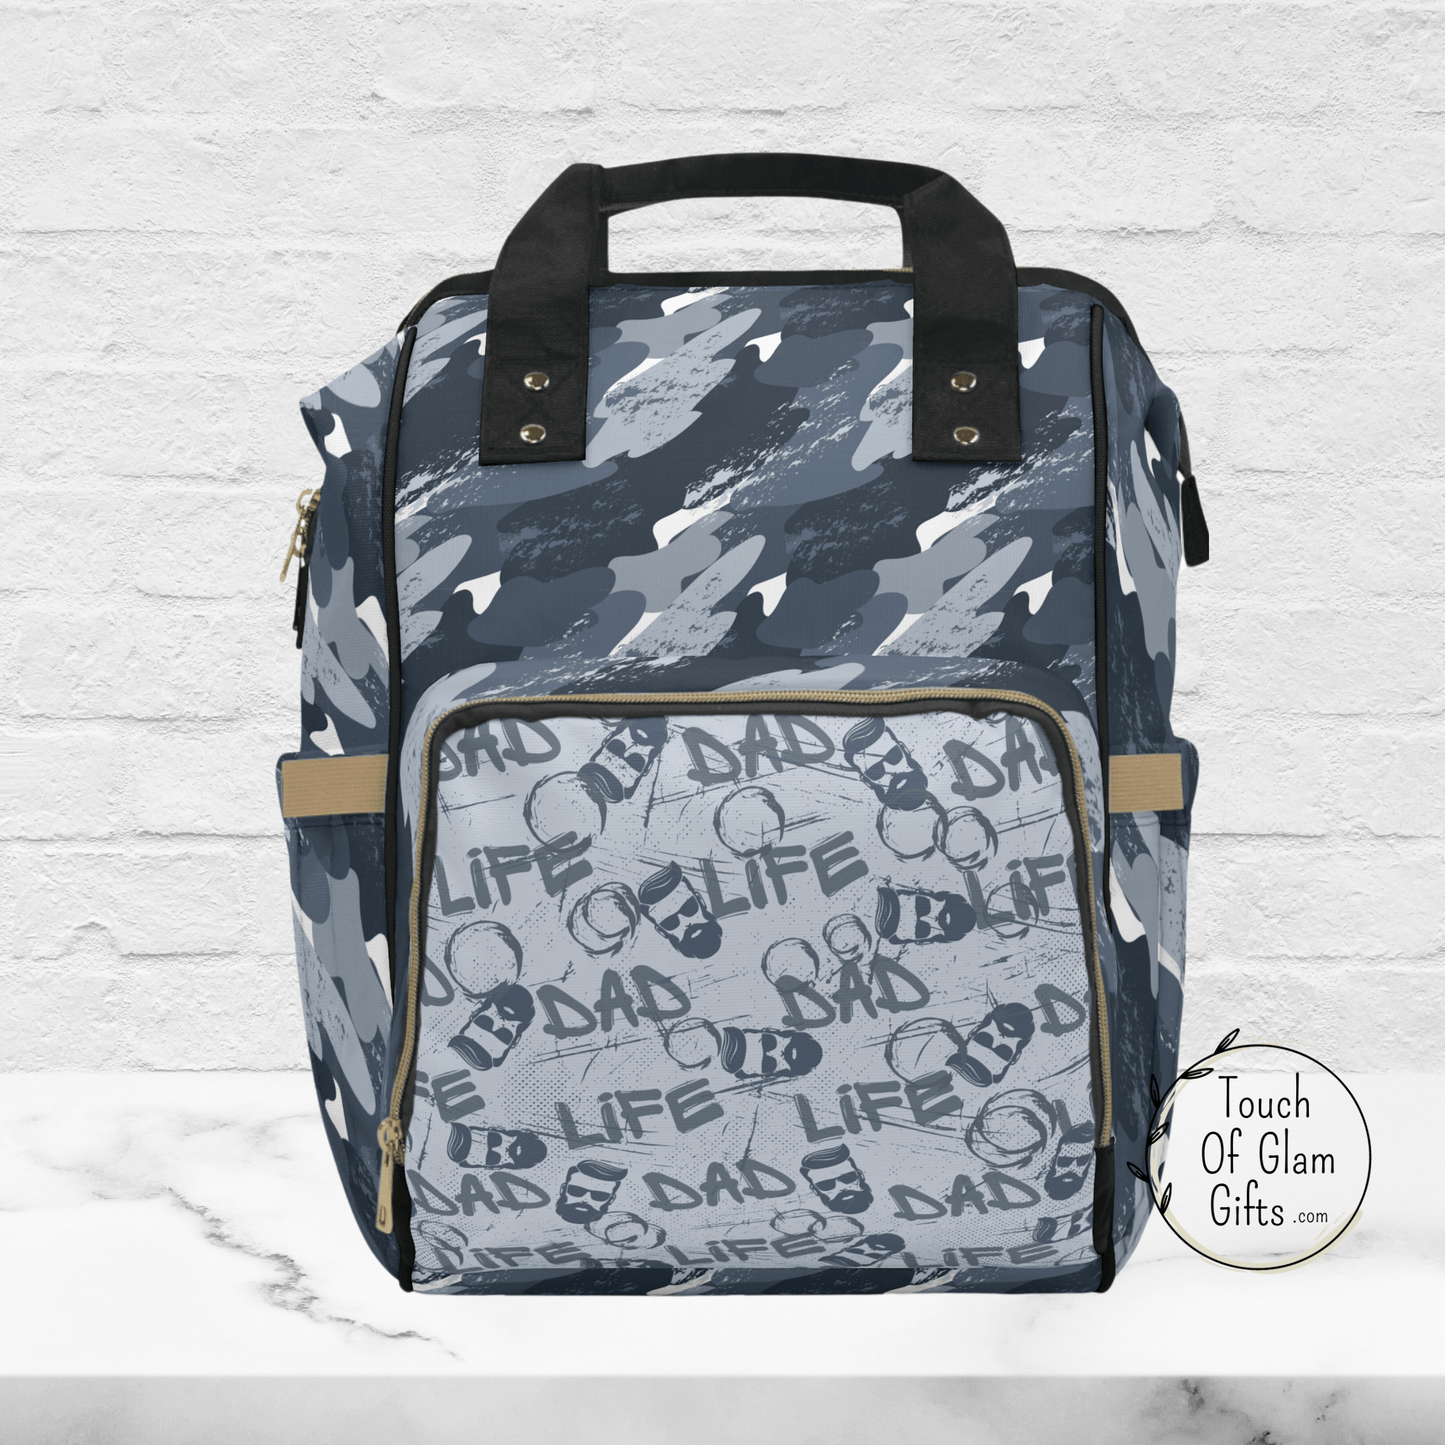 Gone are the days of Dads carrying around feminine diaper bags. This Dad Life, blue camouflage backpack provides a masculine solution for dads on the go, allowing them to carry all the essentials for their baby, while still looking cool.